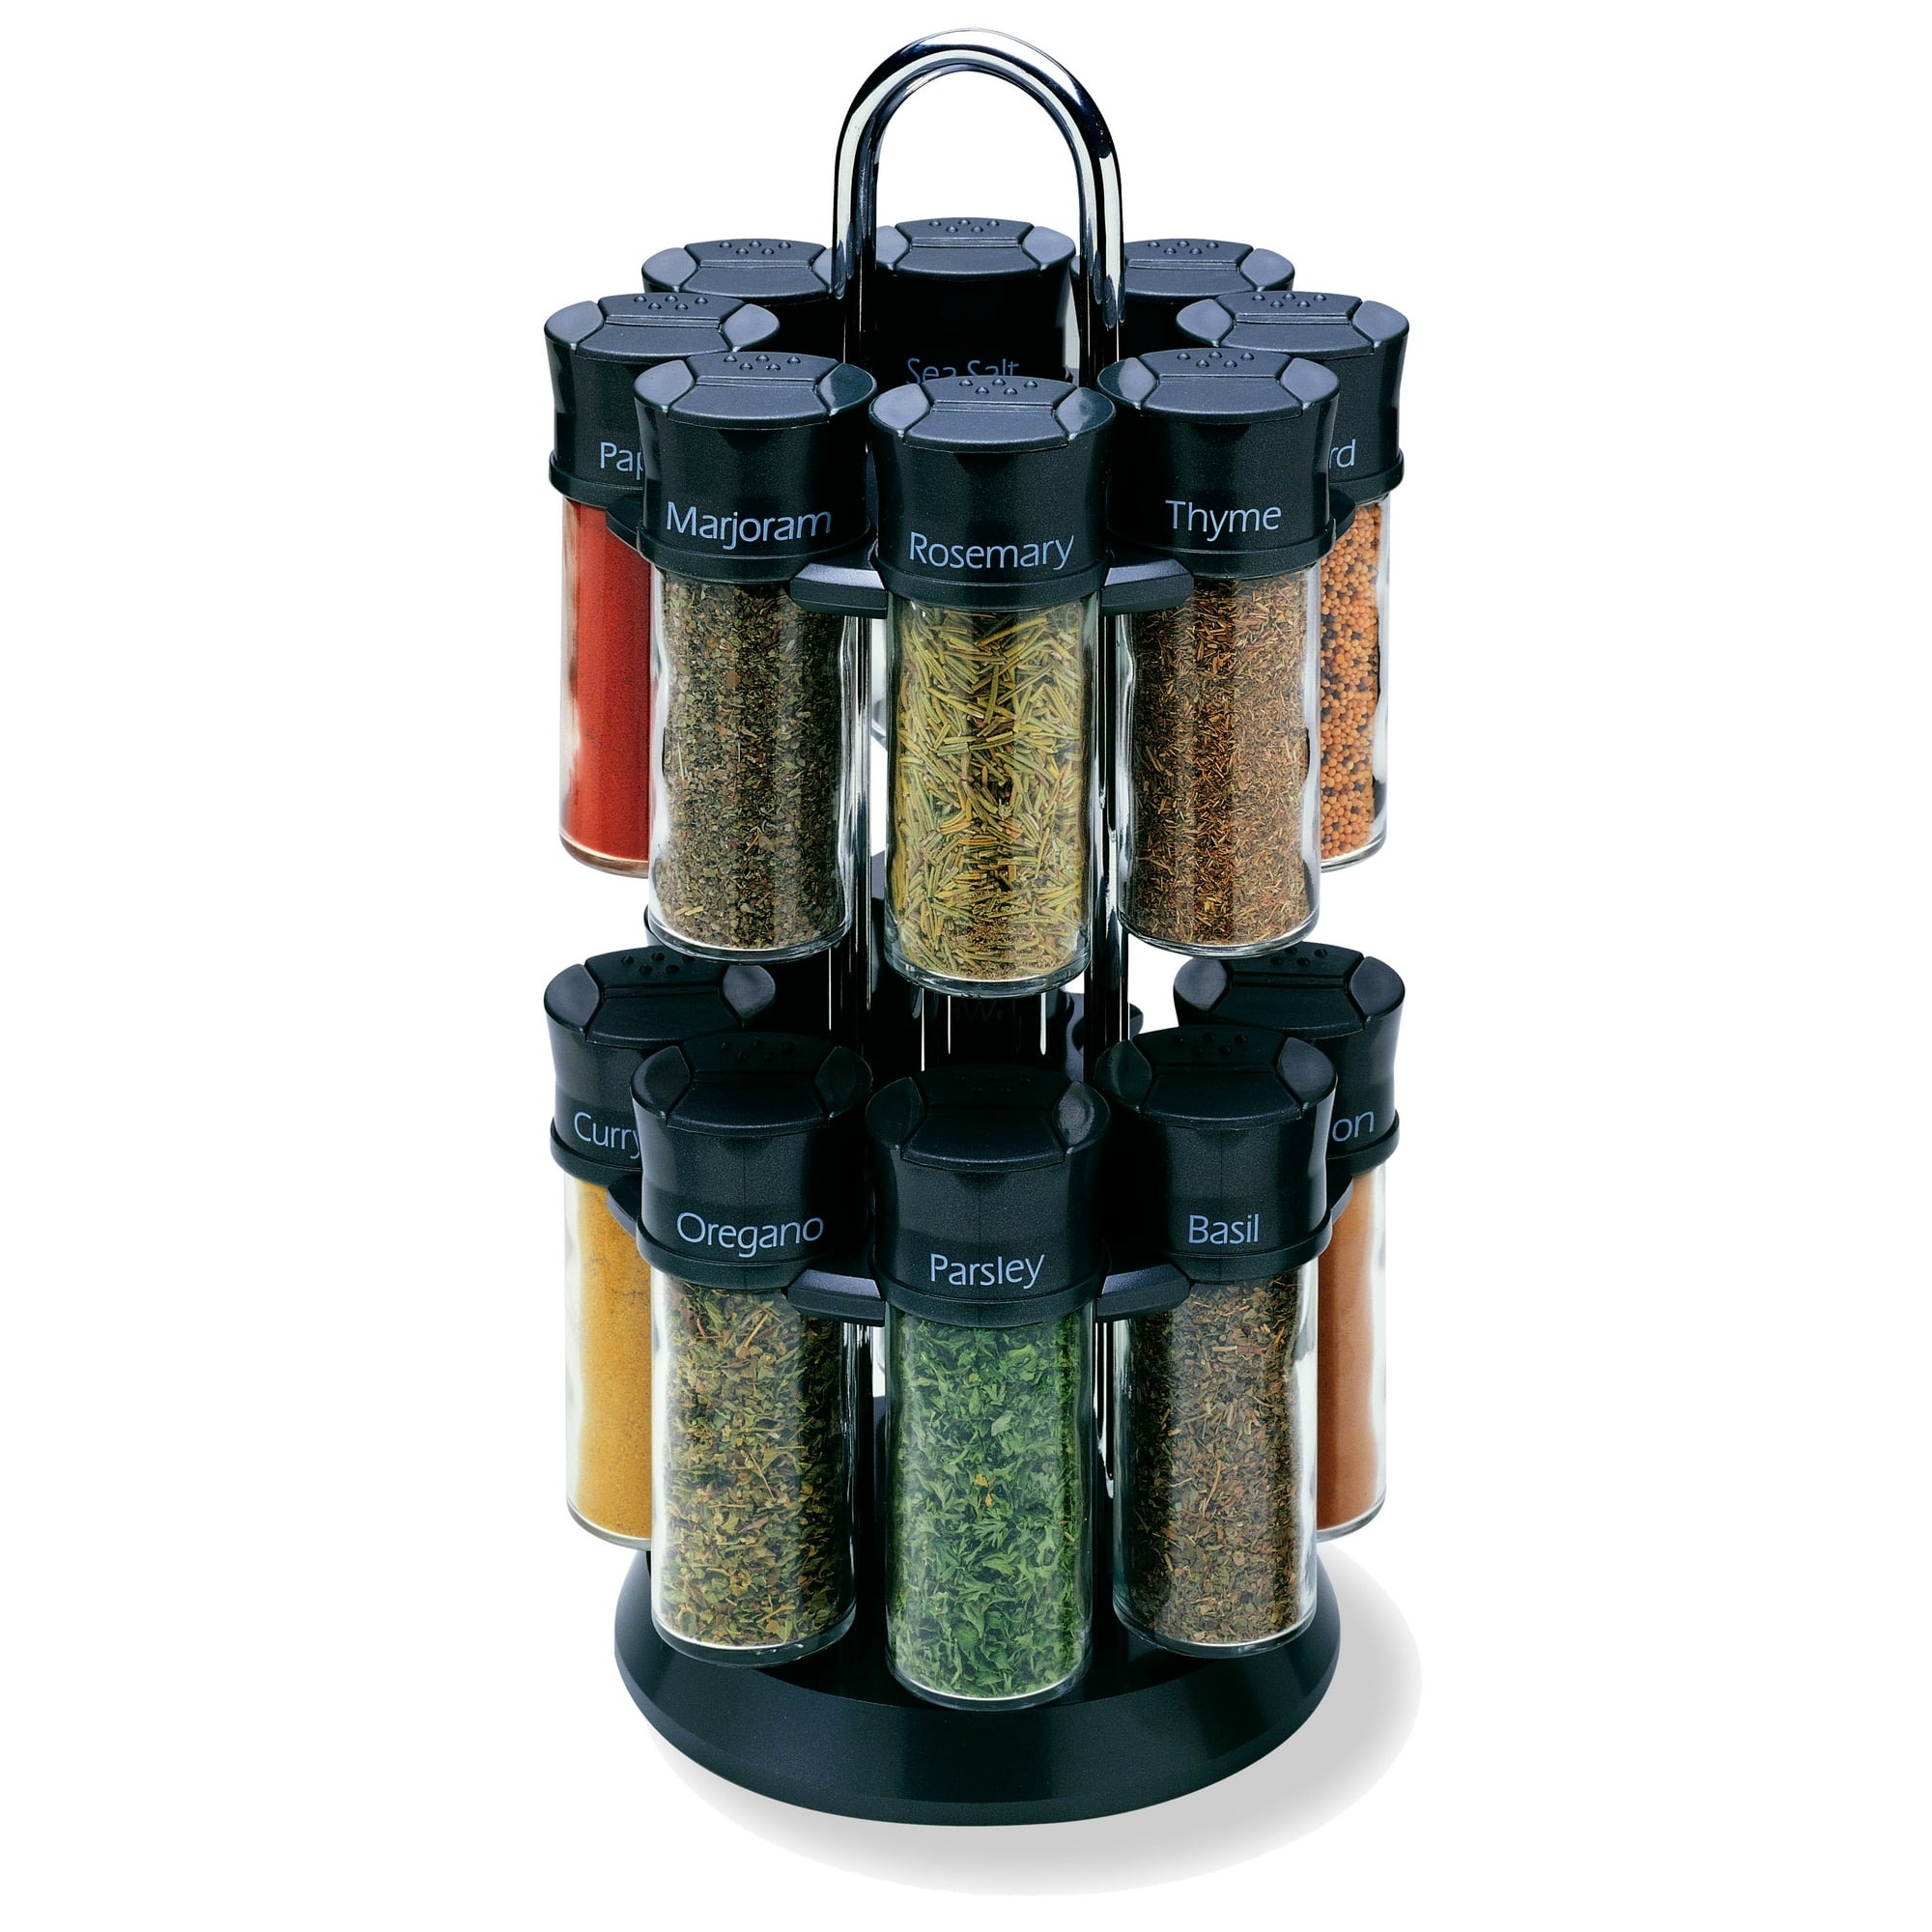 Spice rack with labeled jars for marjoram, rosemary, thyme, curry, oregano, parsley, and basil